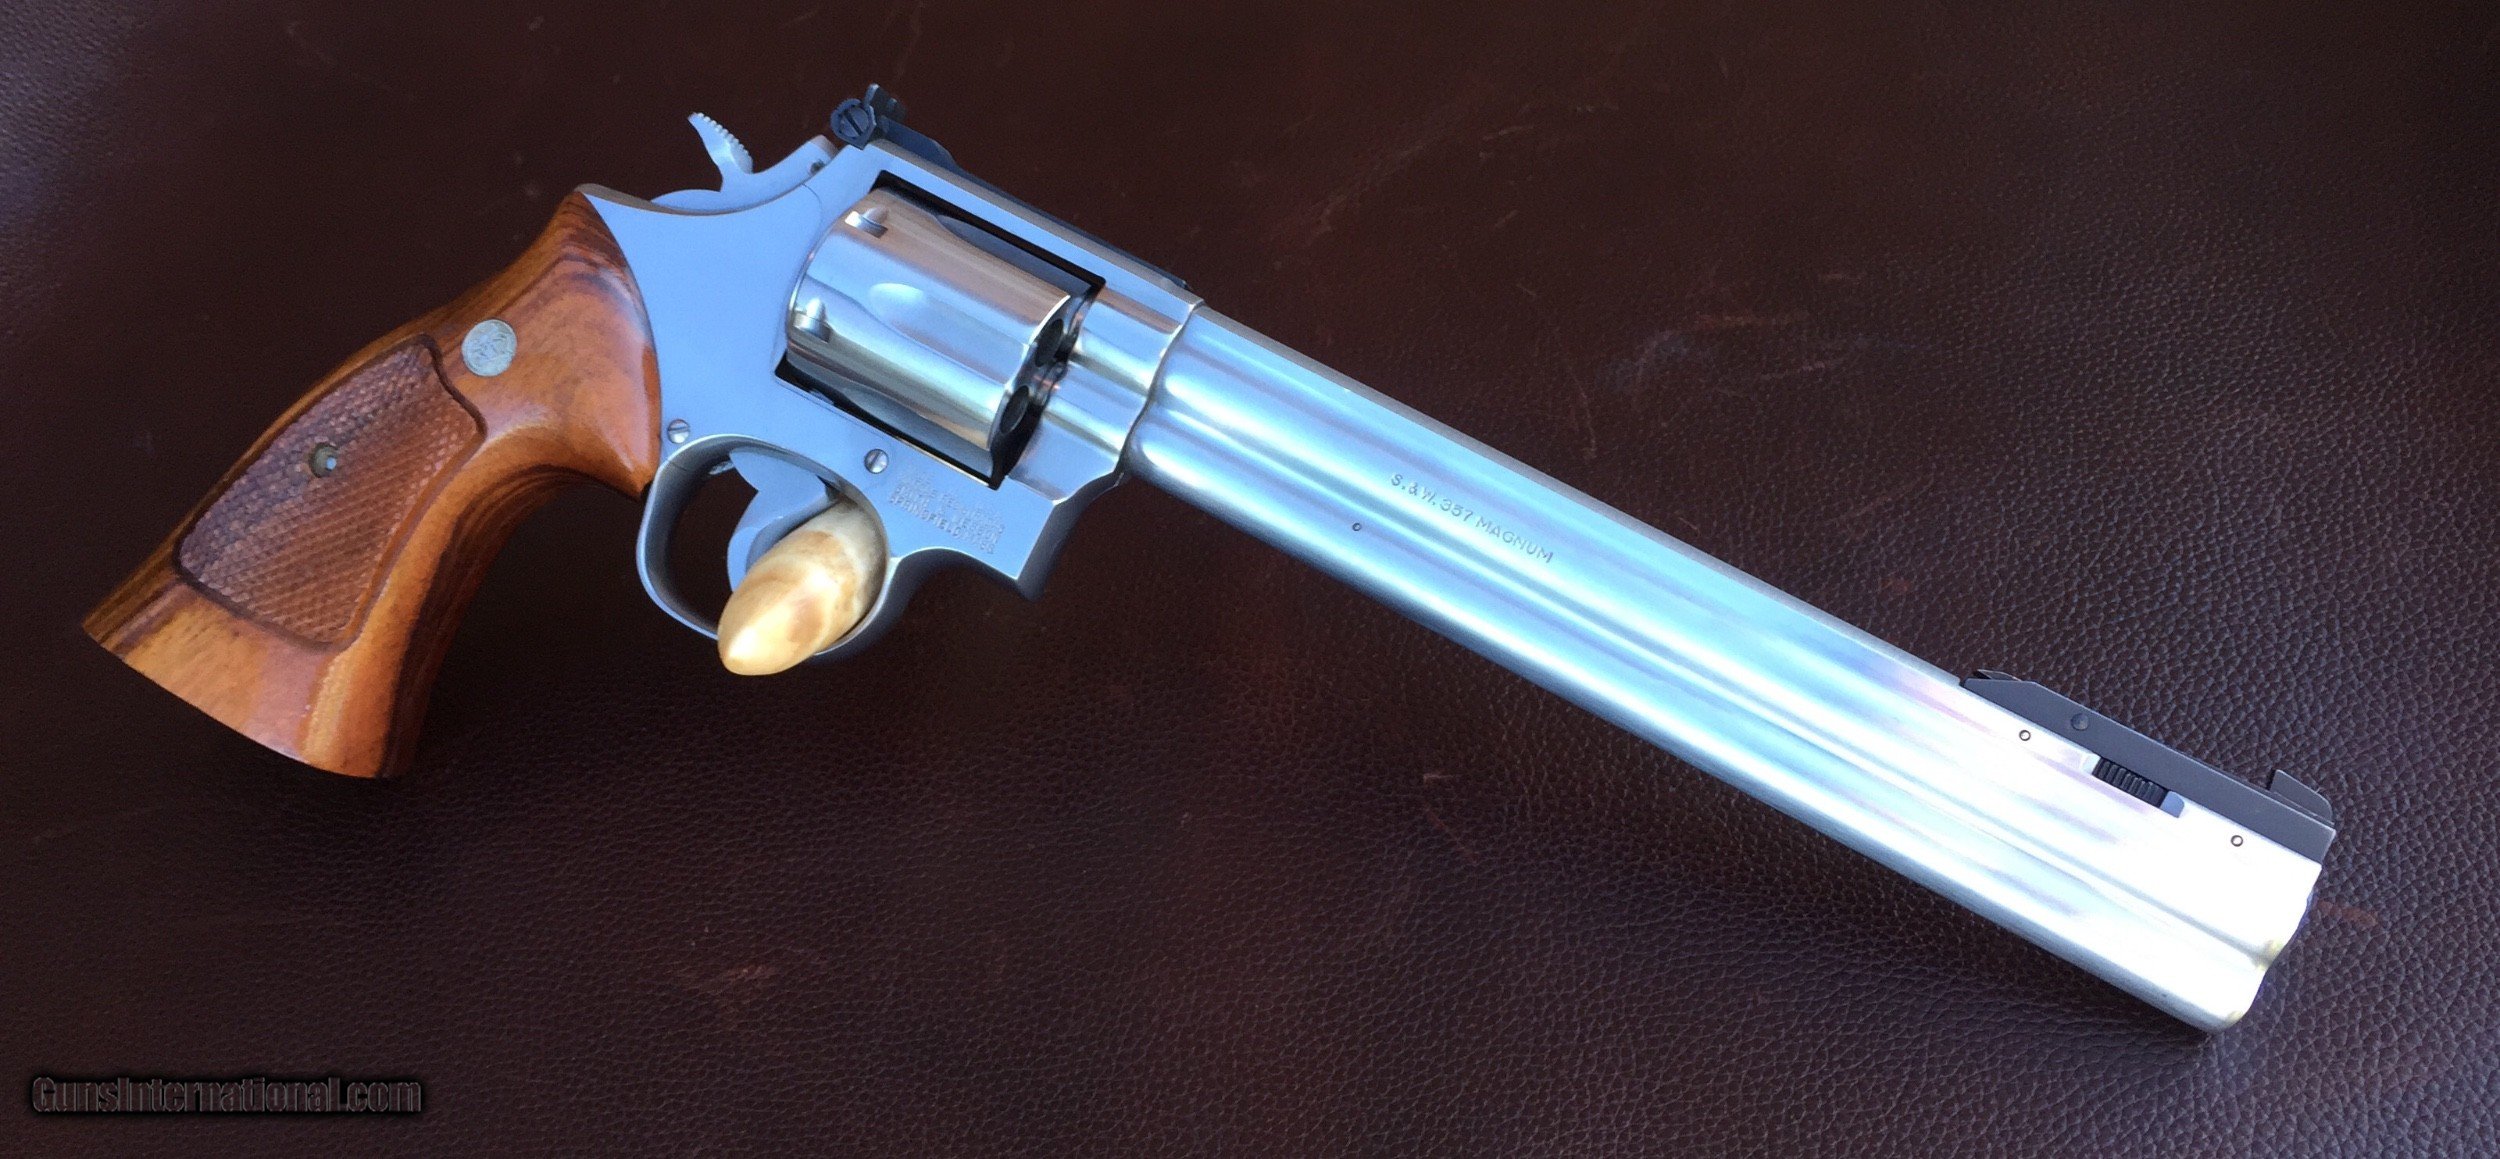 Smith-and-Wesson-Model-686-NO-DASH-SILHOUETTE-357-Magnum-8-3-8inch_101085546_86589_5F1F46D9D4C93690.jpeg